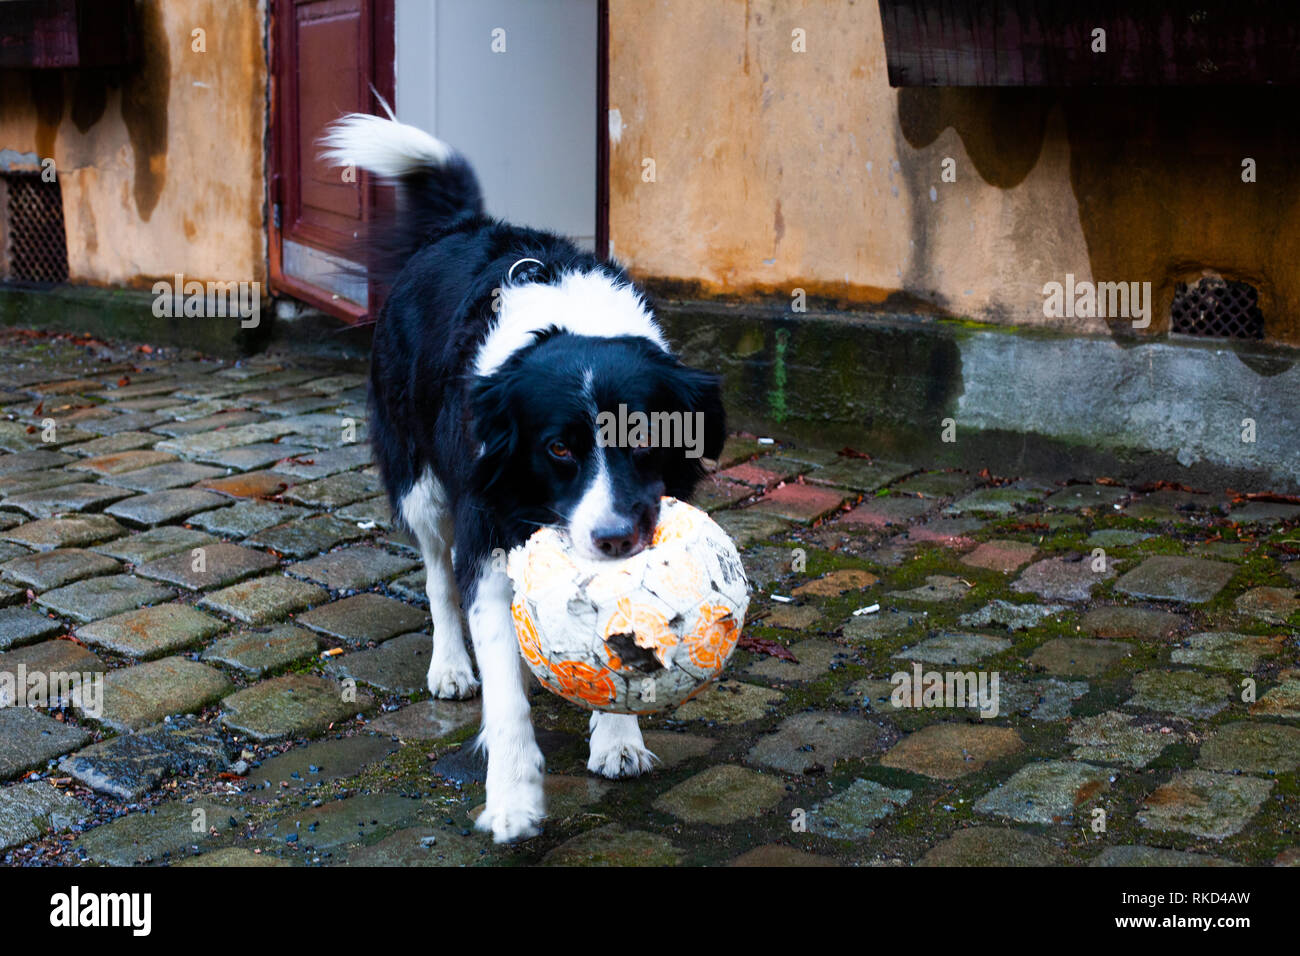 Black and white dog wanting to play with a football Stock Photo